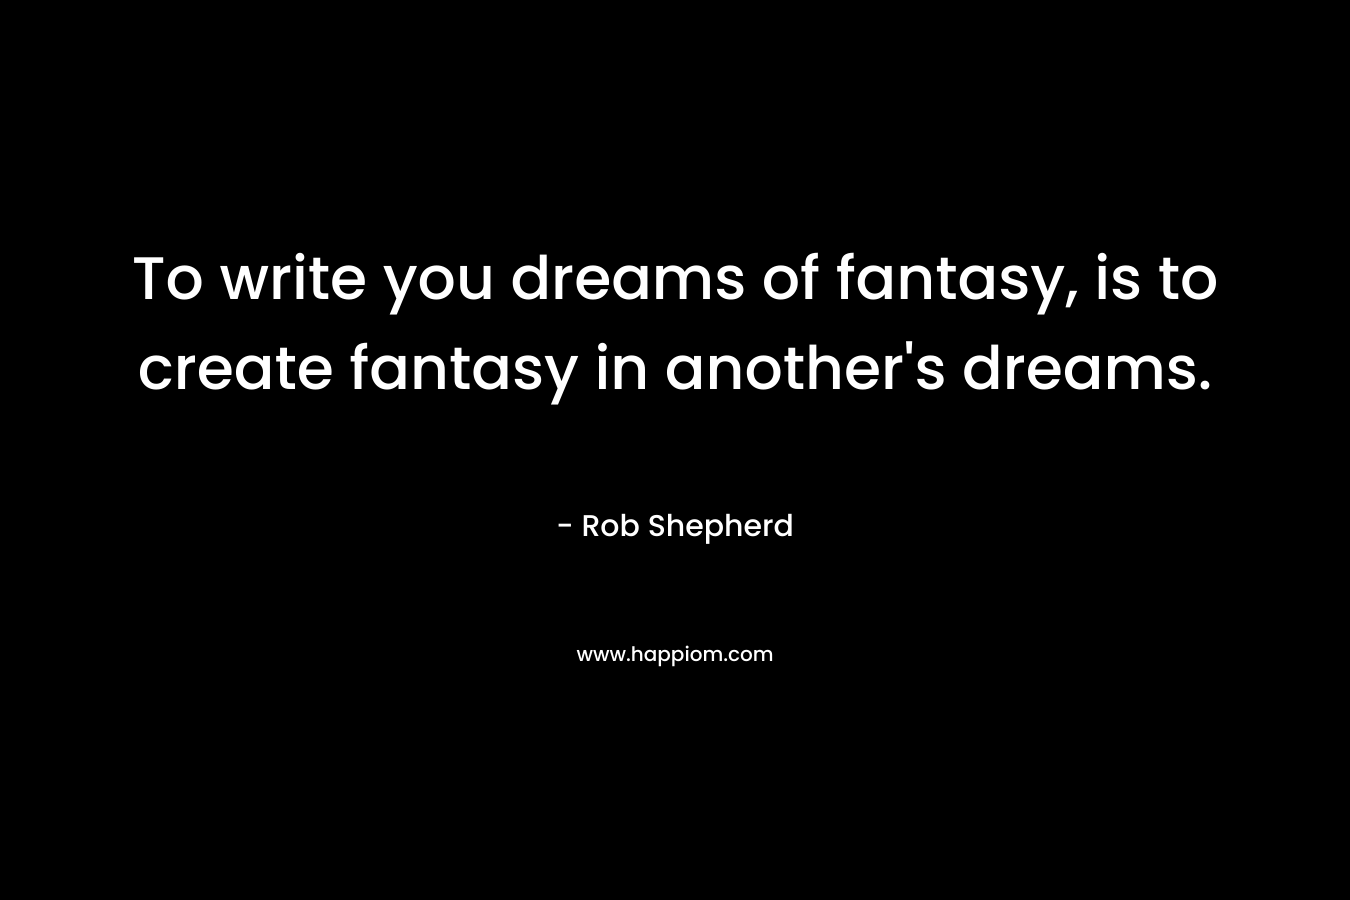 To write you dreams of fantasy, is to create fantasy in another’s dreams. – Rob Shepherd